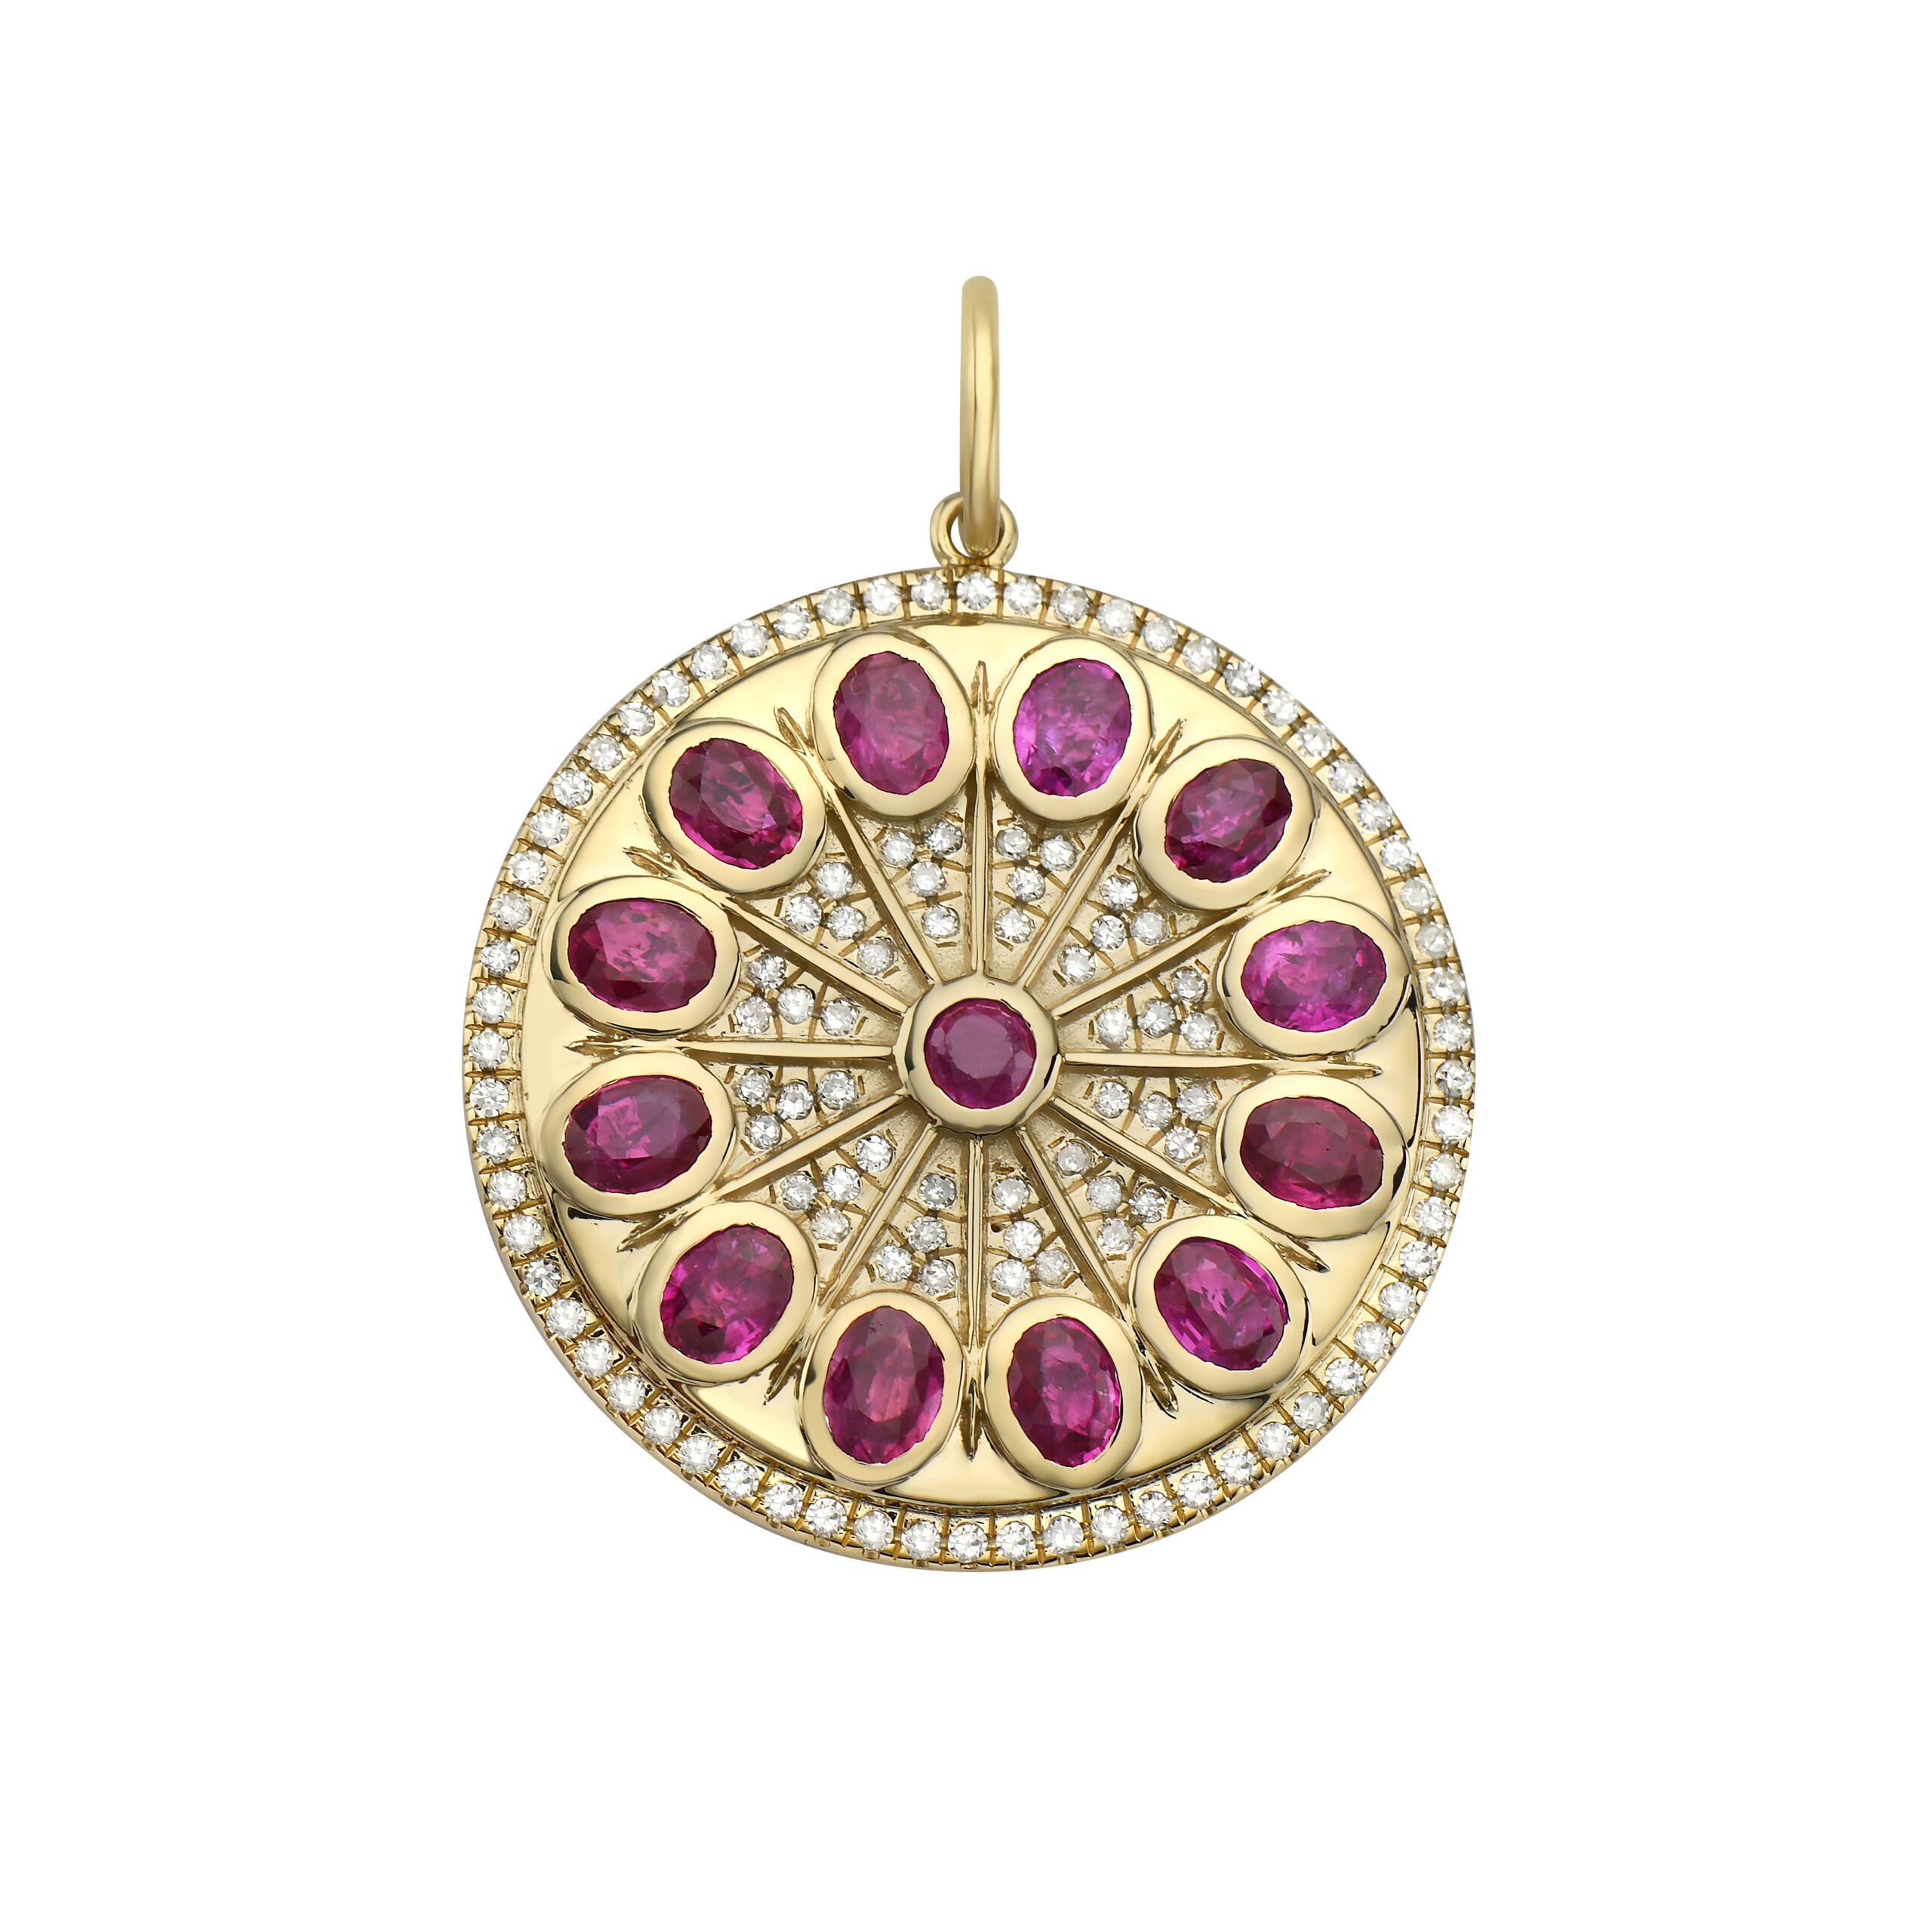 Serenity Amulet With Diamonds And Rubies